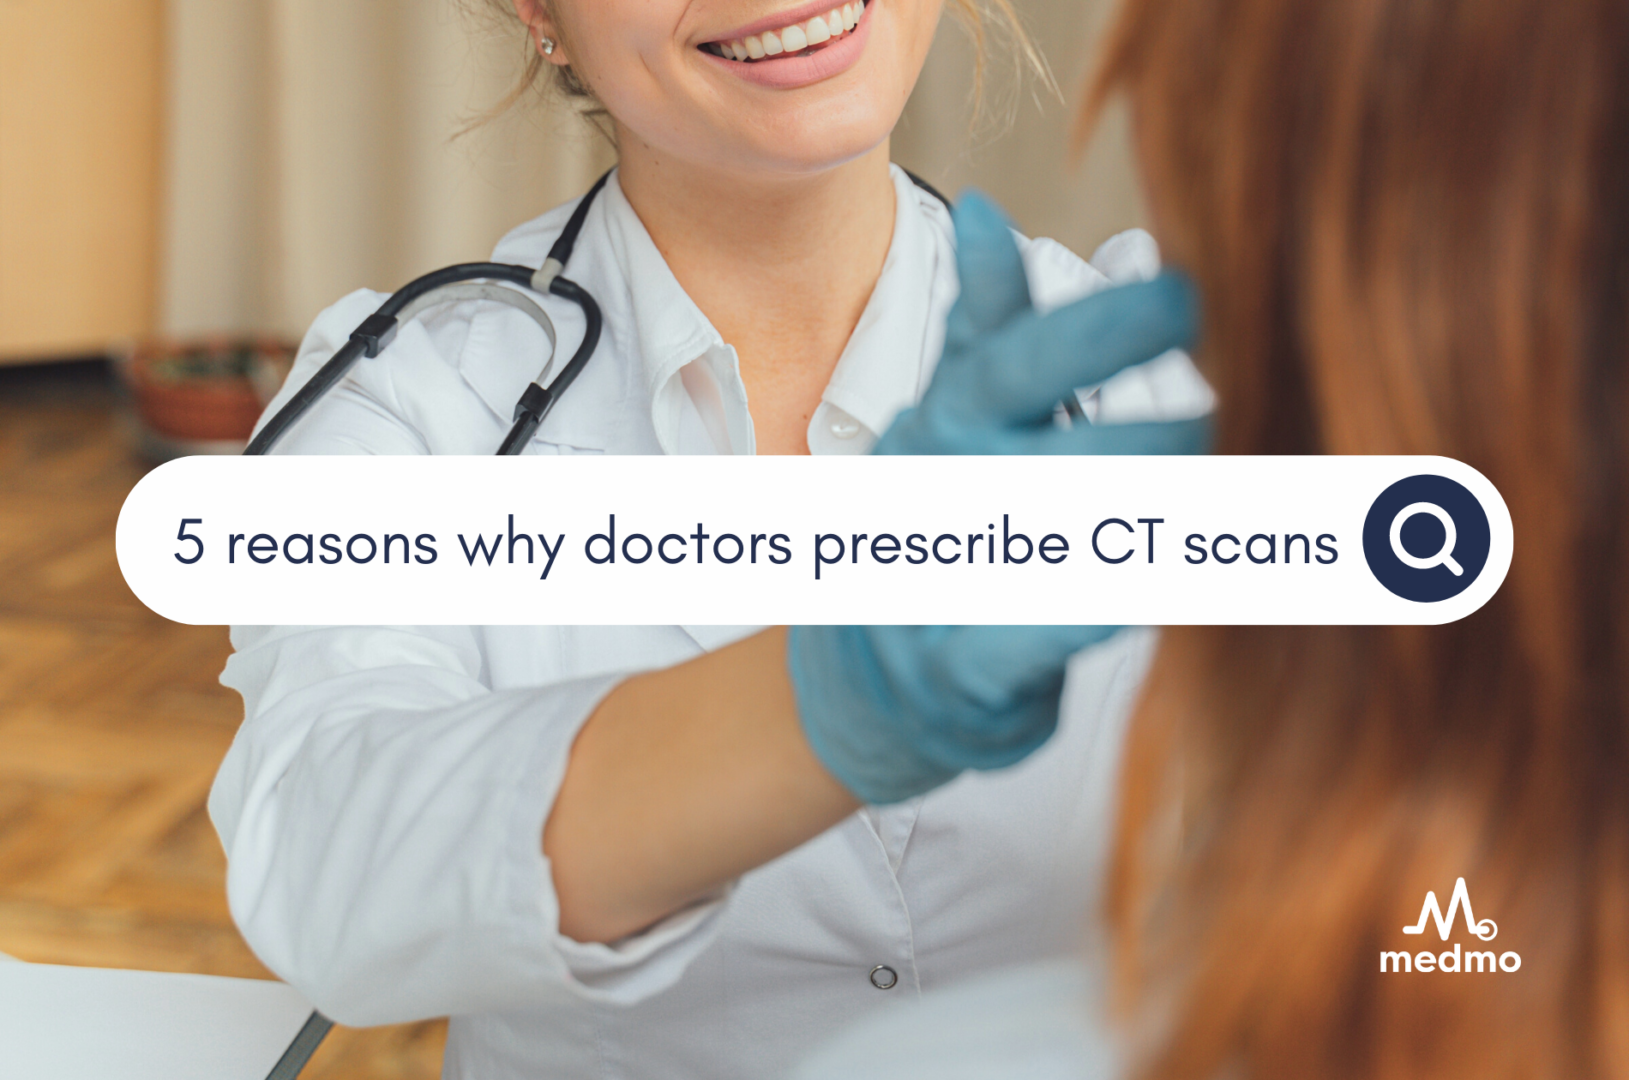 5 Reasons Why Doctors Prescribe CT Scans